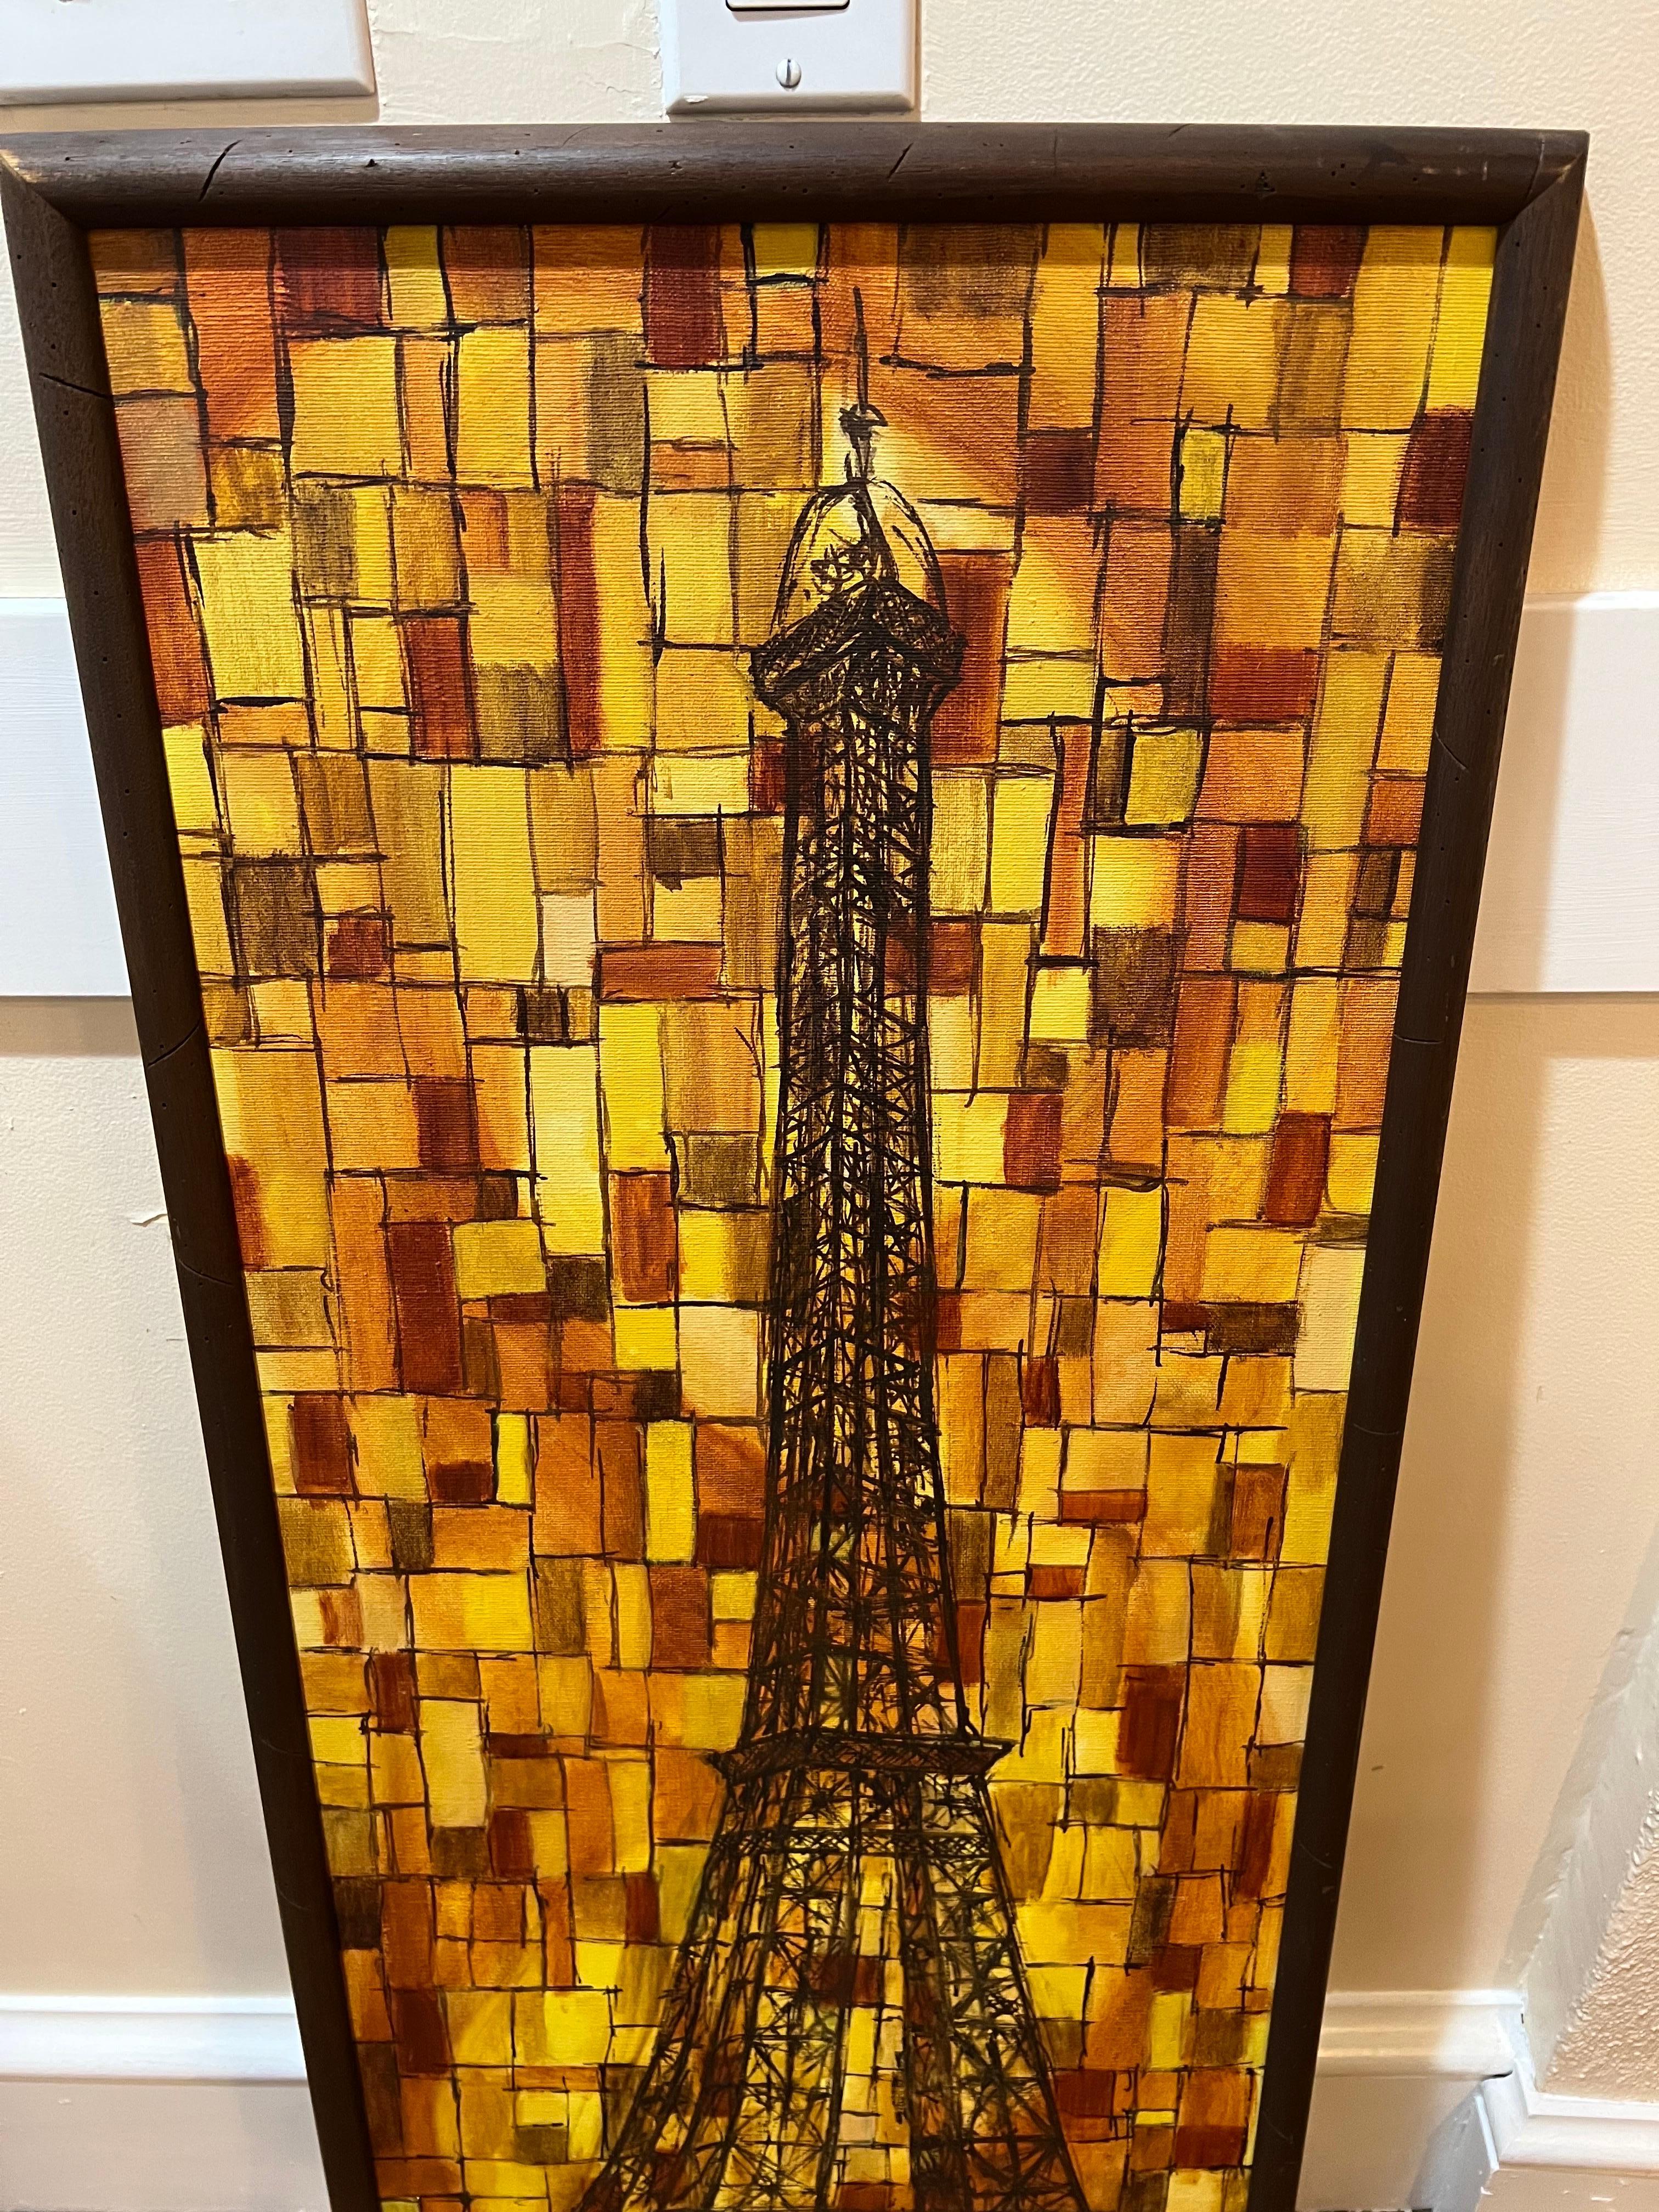 Signed Mid Century Eiffel Tower painting by Joseph L. Klein III. Fabulous composition of the Eiffel tower in orange and brown tones. Cubist in style with its checkered patterns. Please confirm dimensions prior to purchase. This item can parcel ship